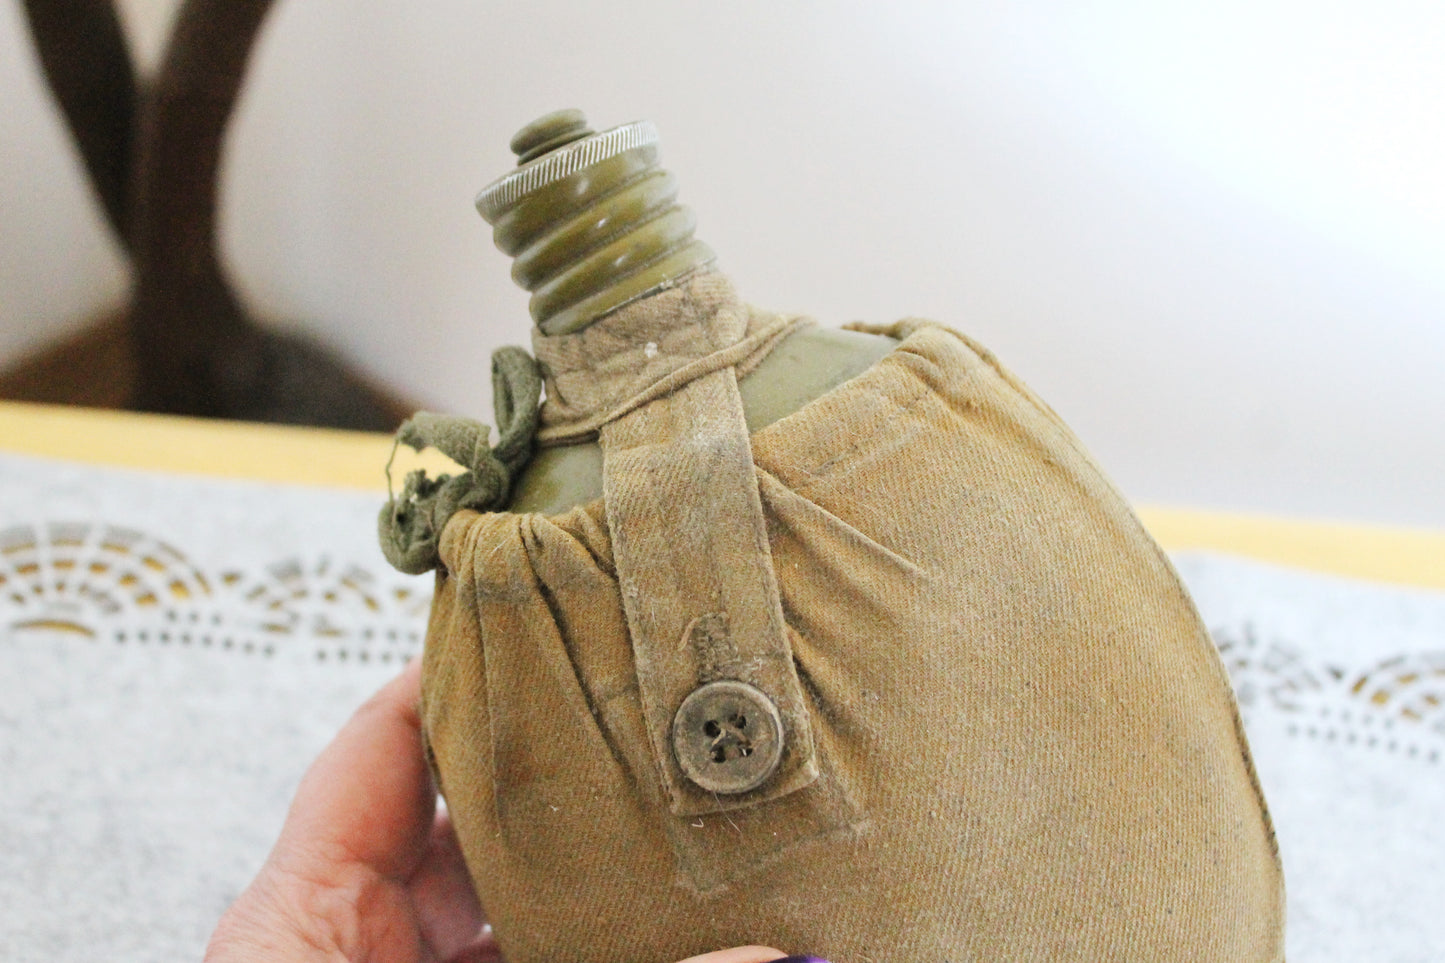 USSR Soldier's Canteen - Flask for Water - Army flask - Bottle with Cover Pouch - 1970s